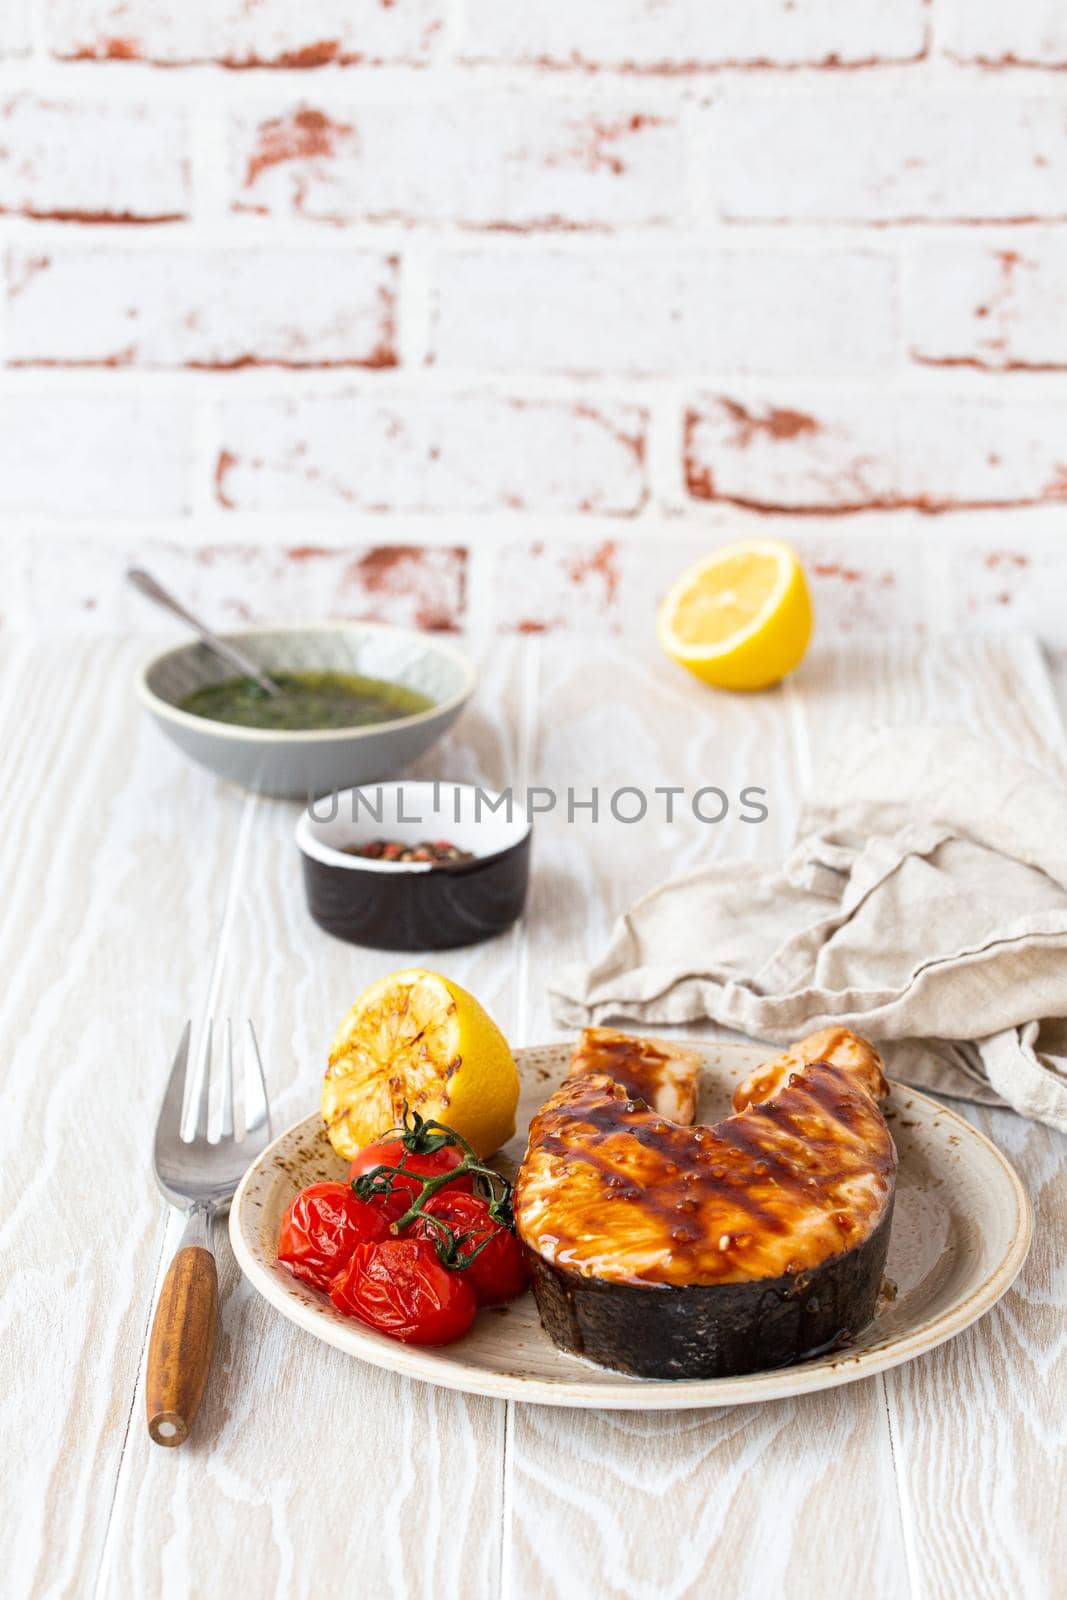 Grilled salmon steak on white wooden background by its_al_dente